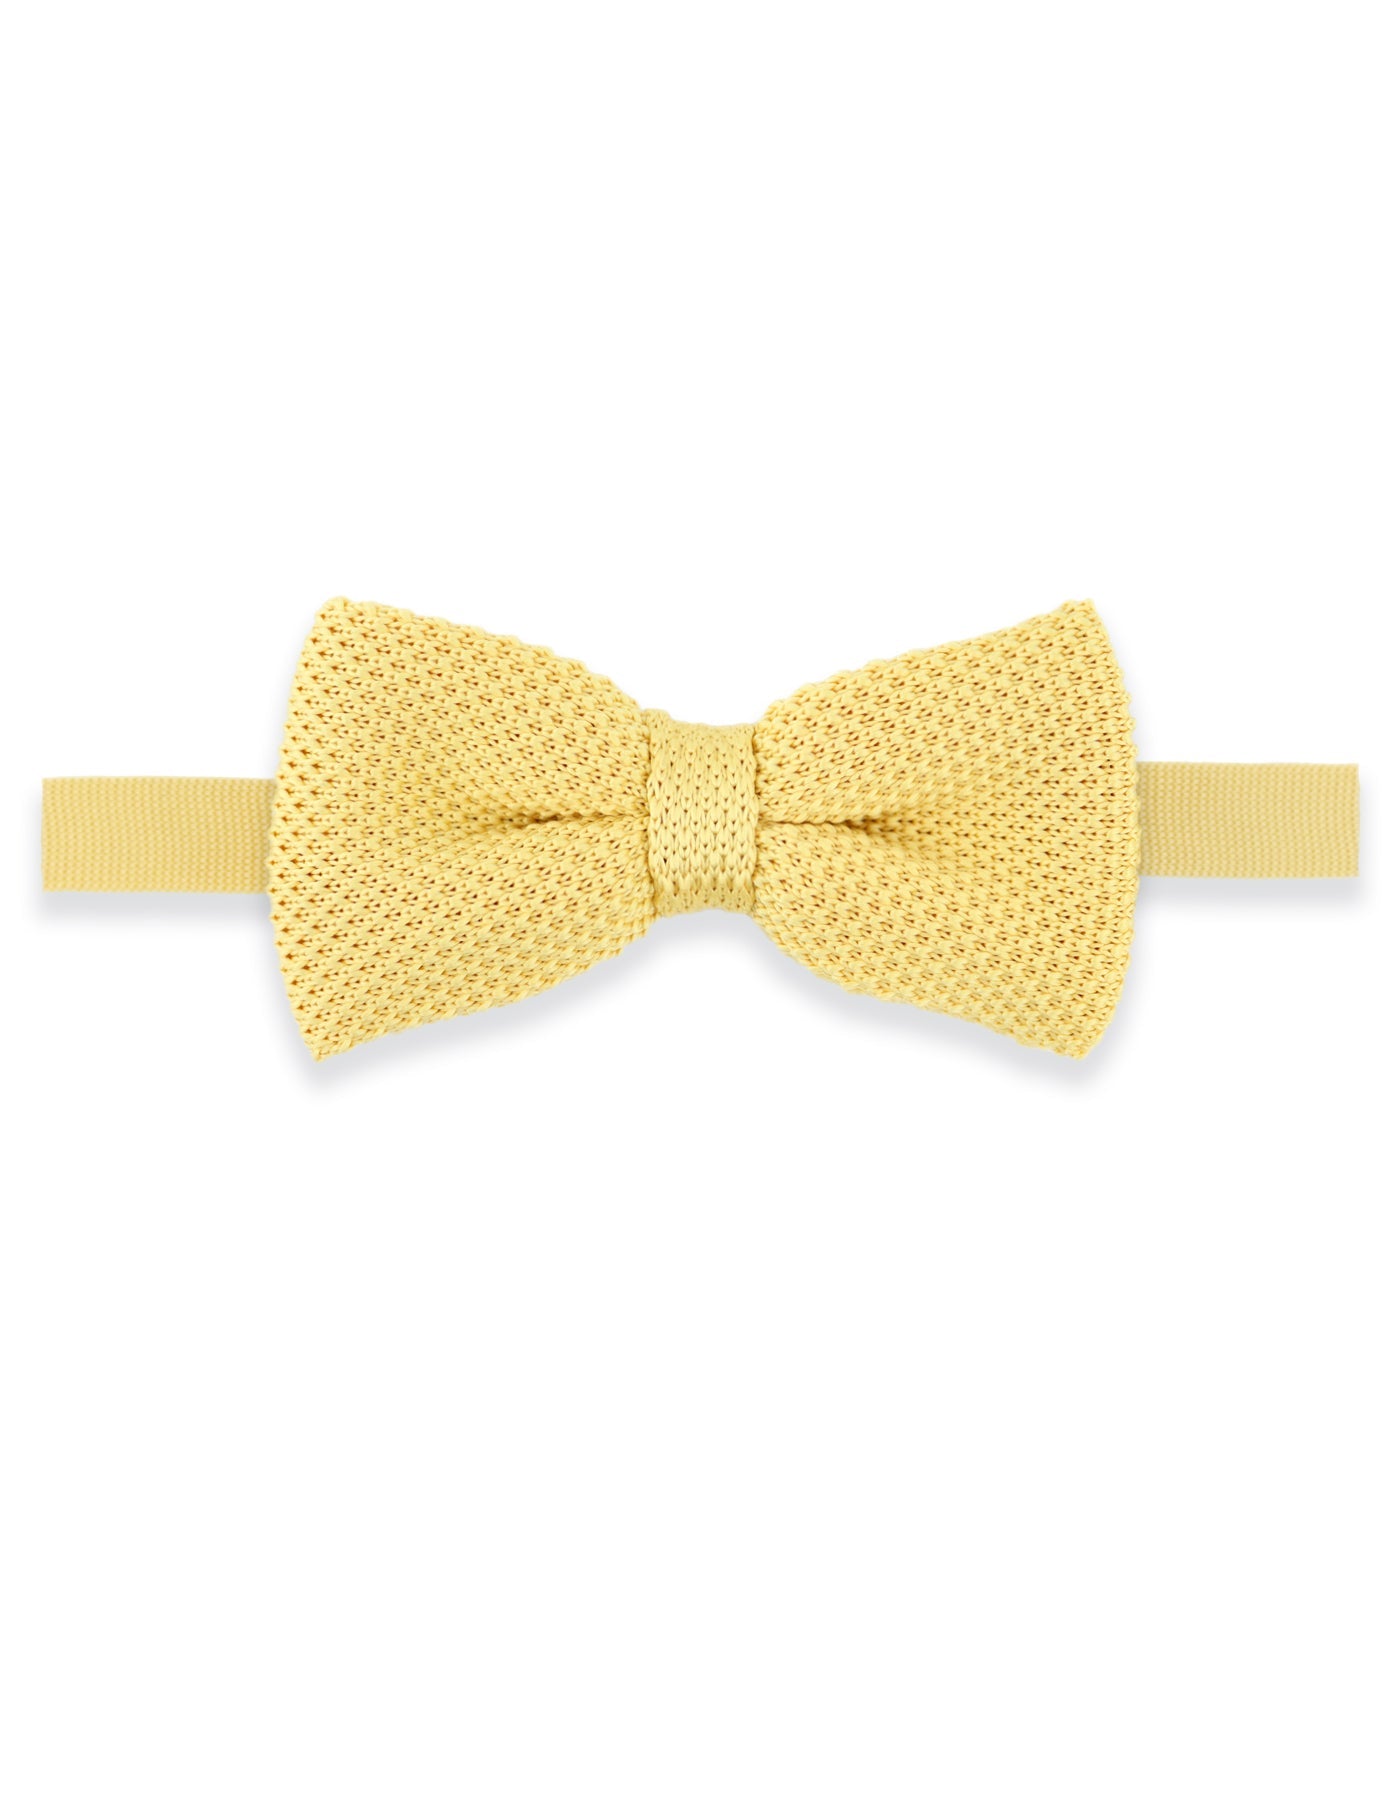 100% Polyester Knitted Pocket Square - Pastel Yellow